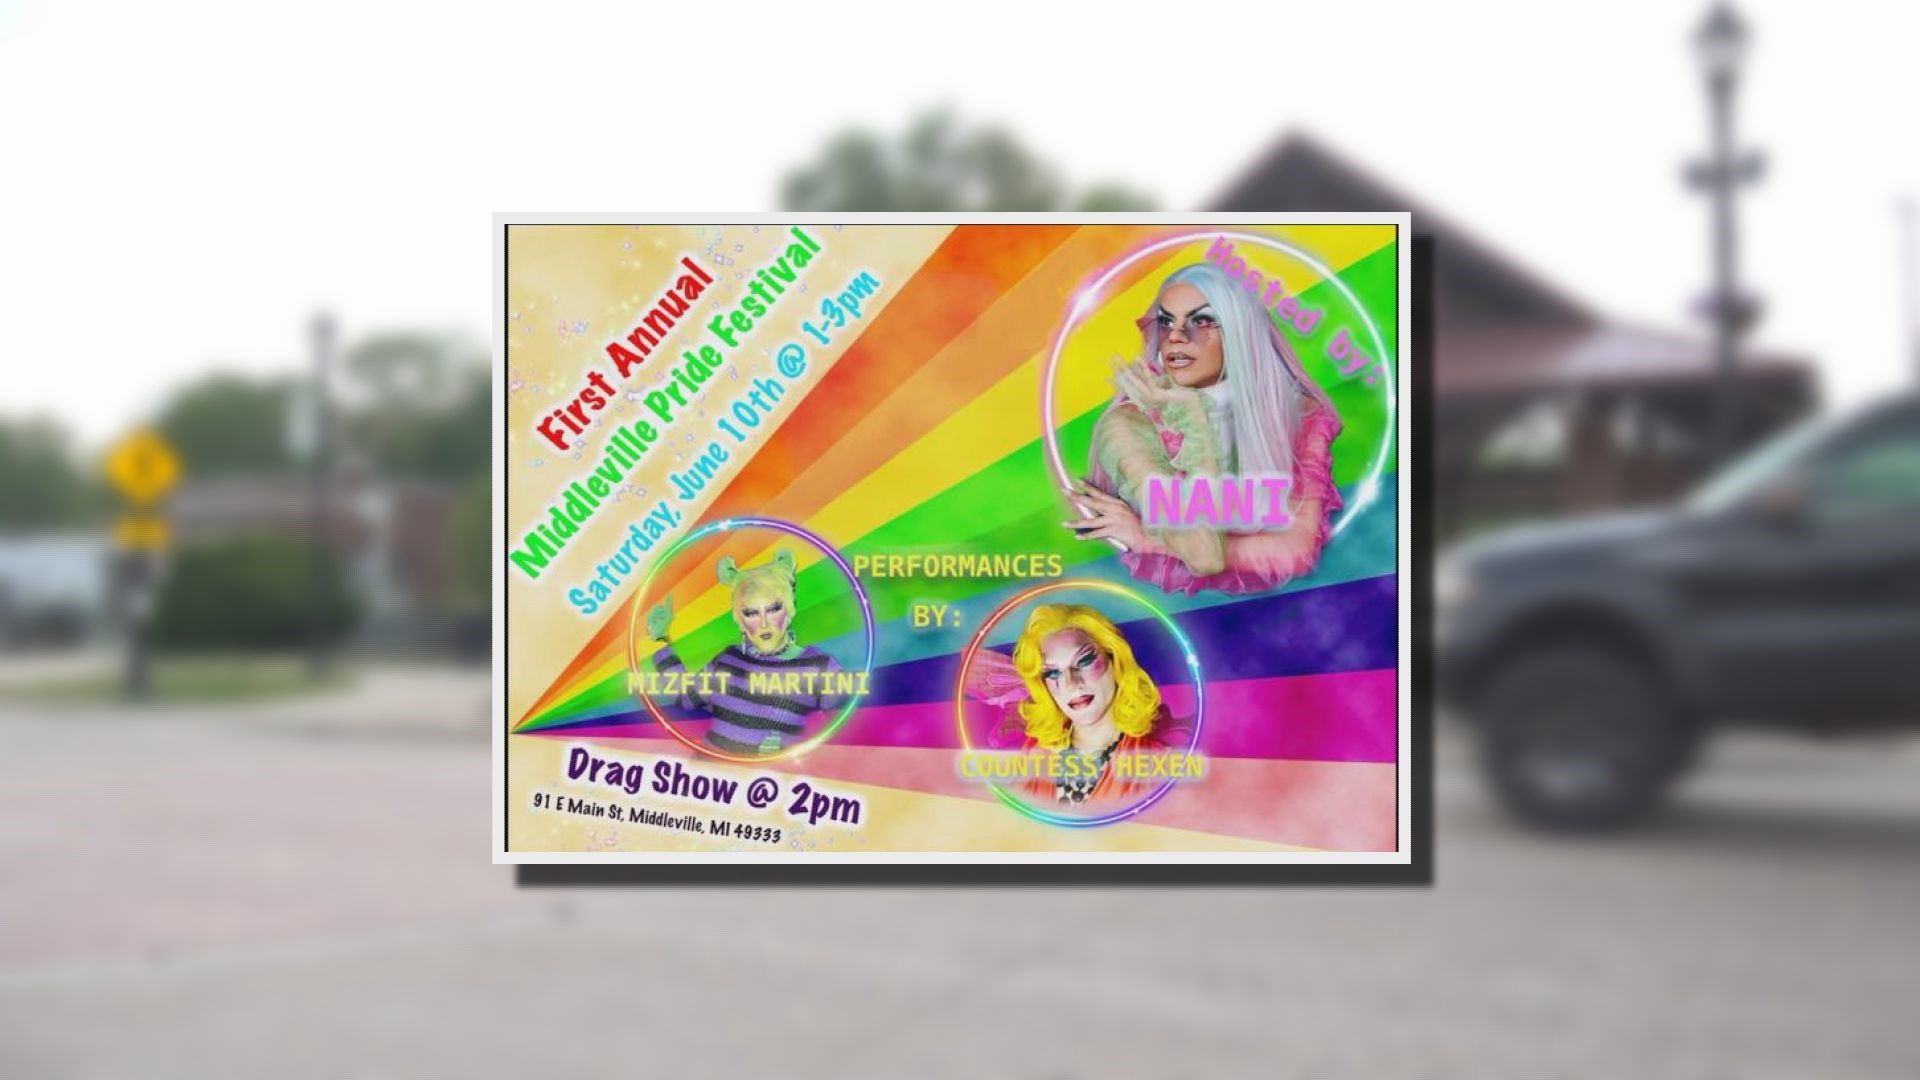 Middleville will have it's first Pride Festival on Saturday. Organizers Olivia Bennett and Amanda Fisk said the event will be family friendly.